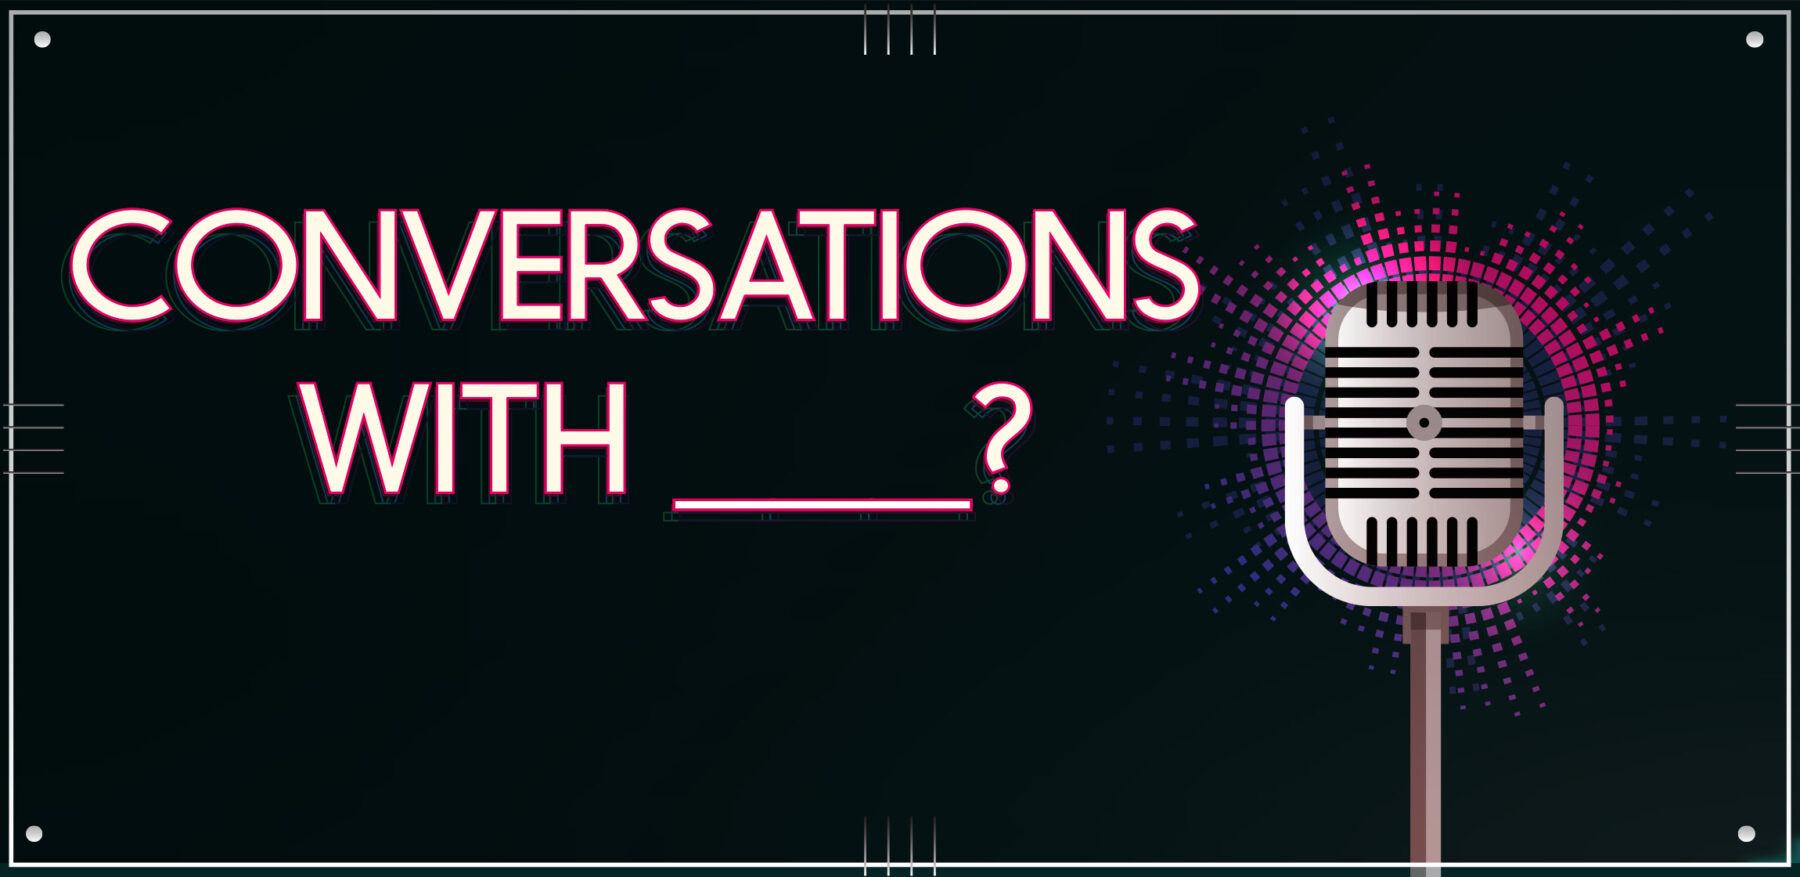 Conversations with ___?